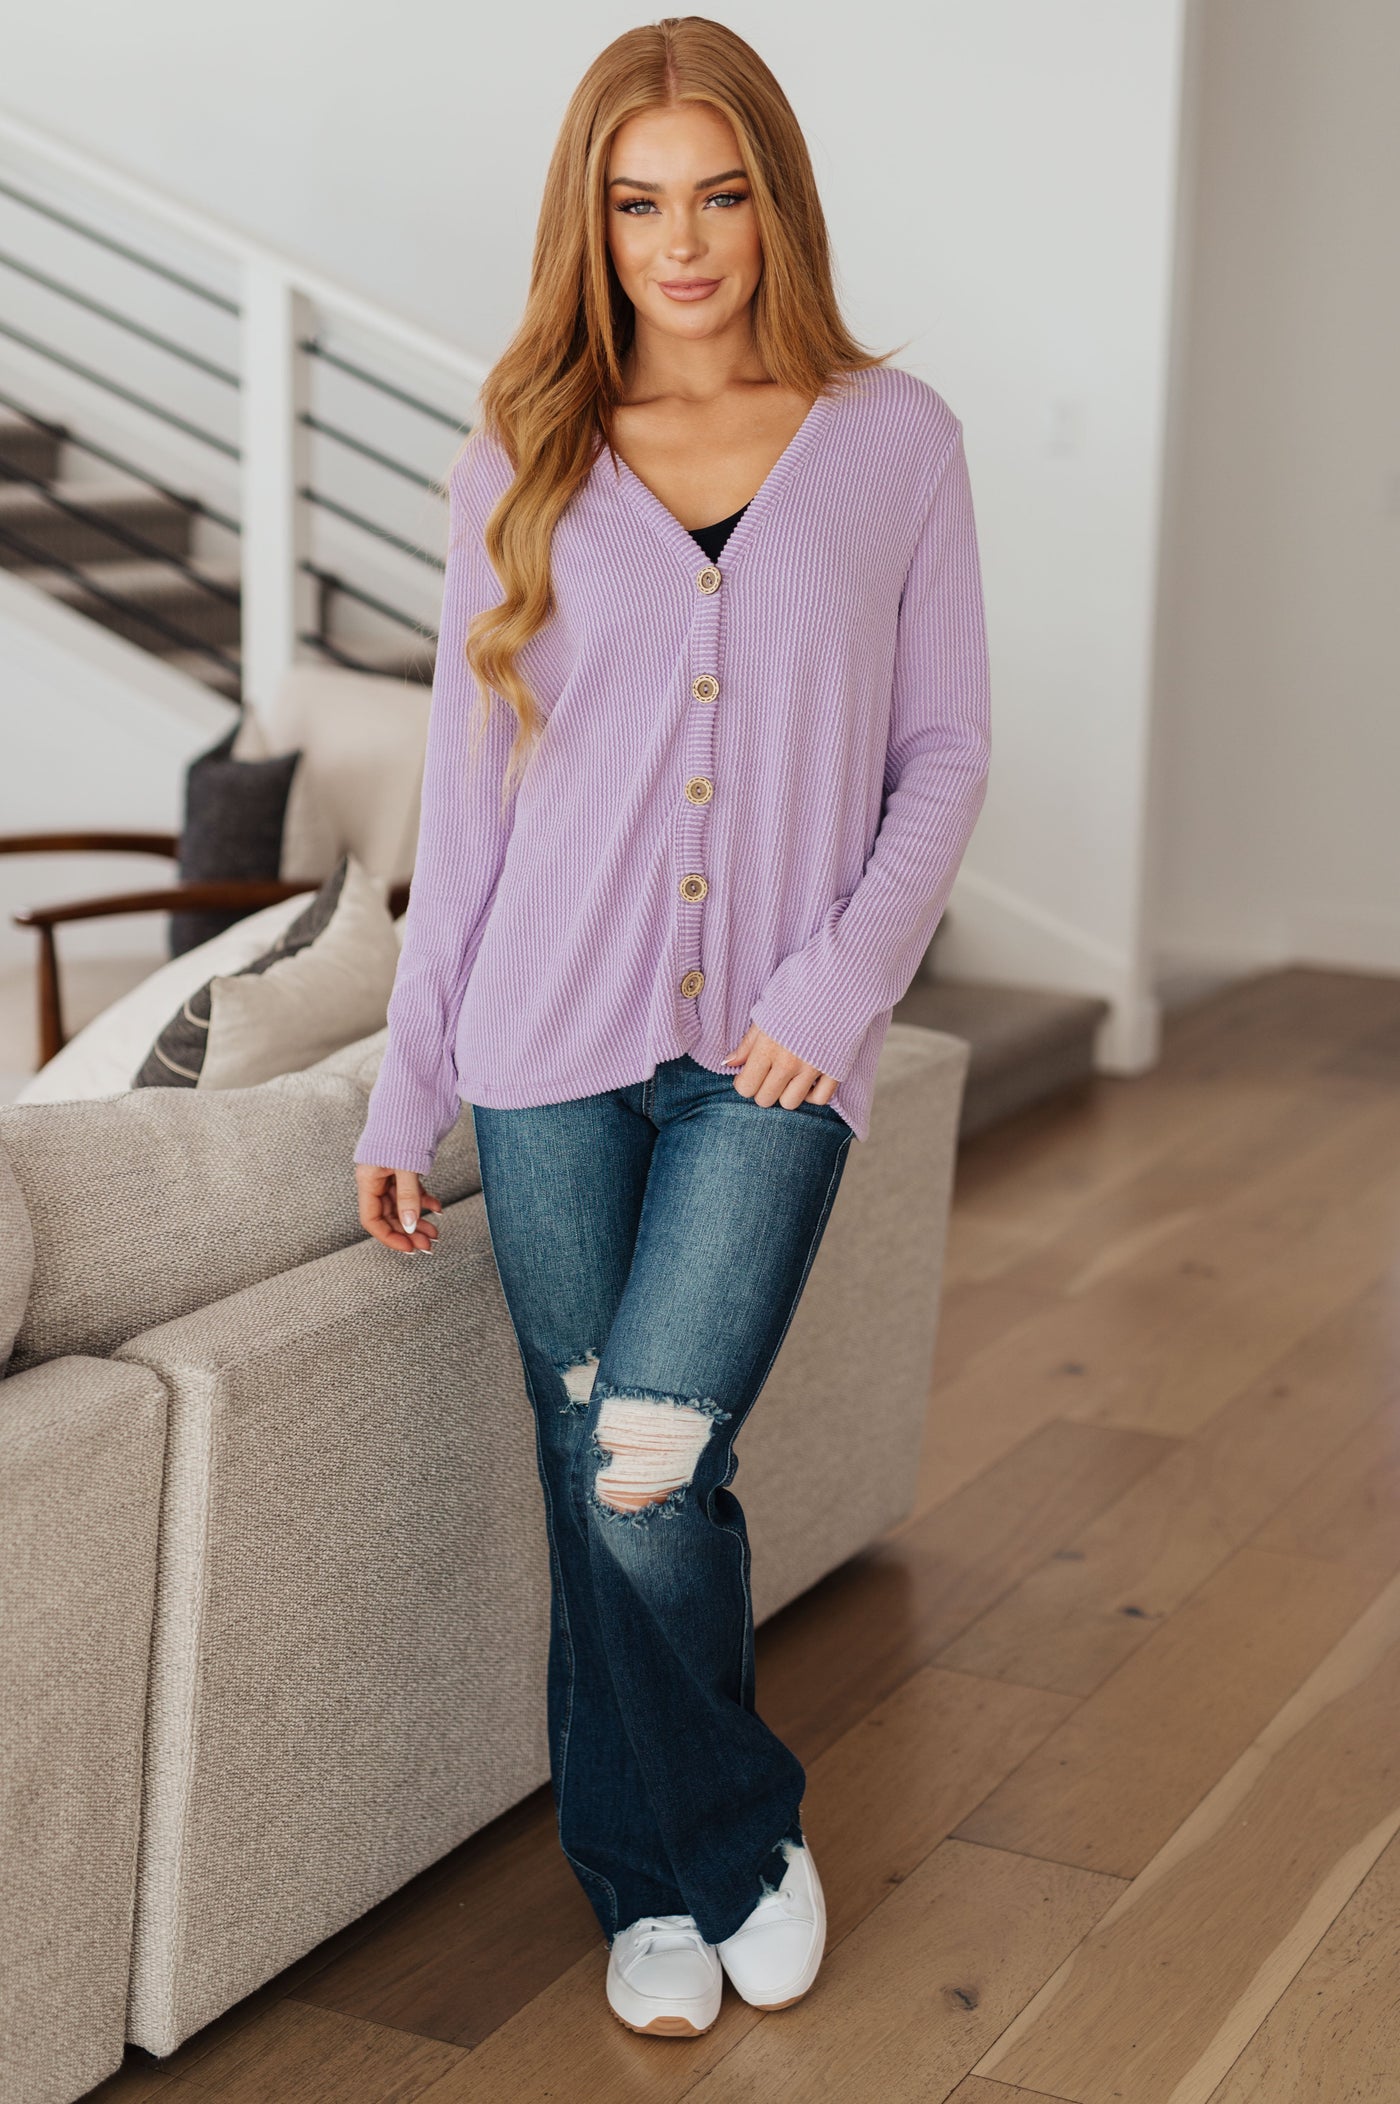 Look your best in the Dilly Dally Ribbed Cardigan. Featuring a chic v-neckline and textured rib knit design, this cardigan is comfortable yet stylish